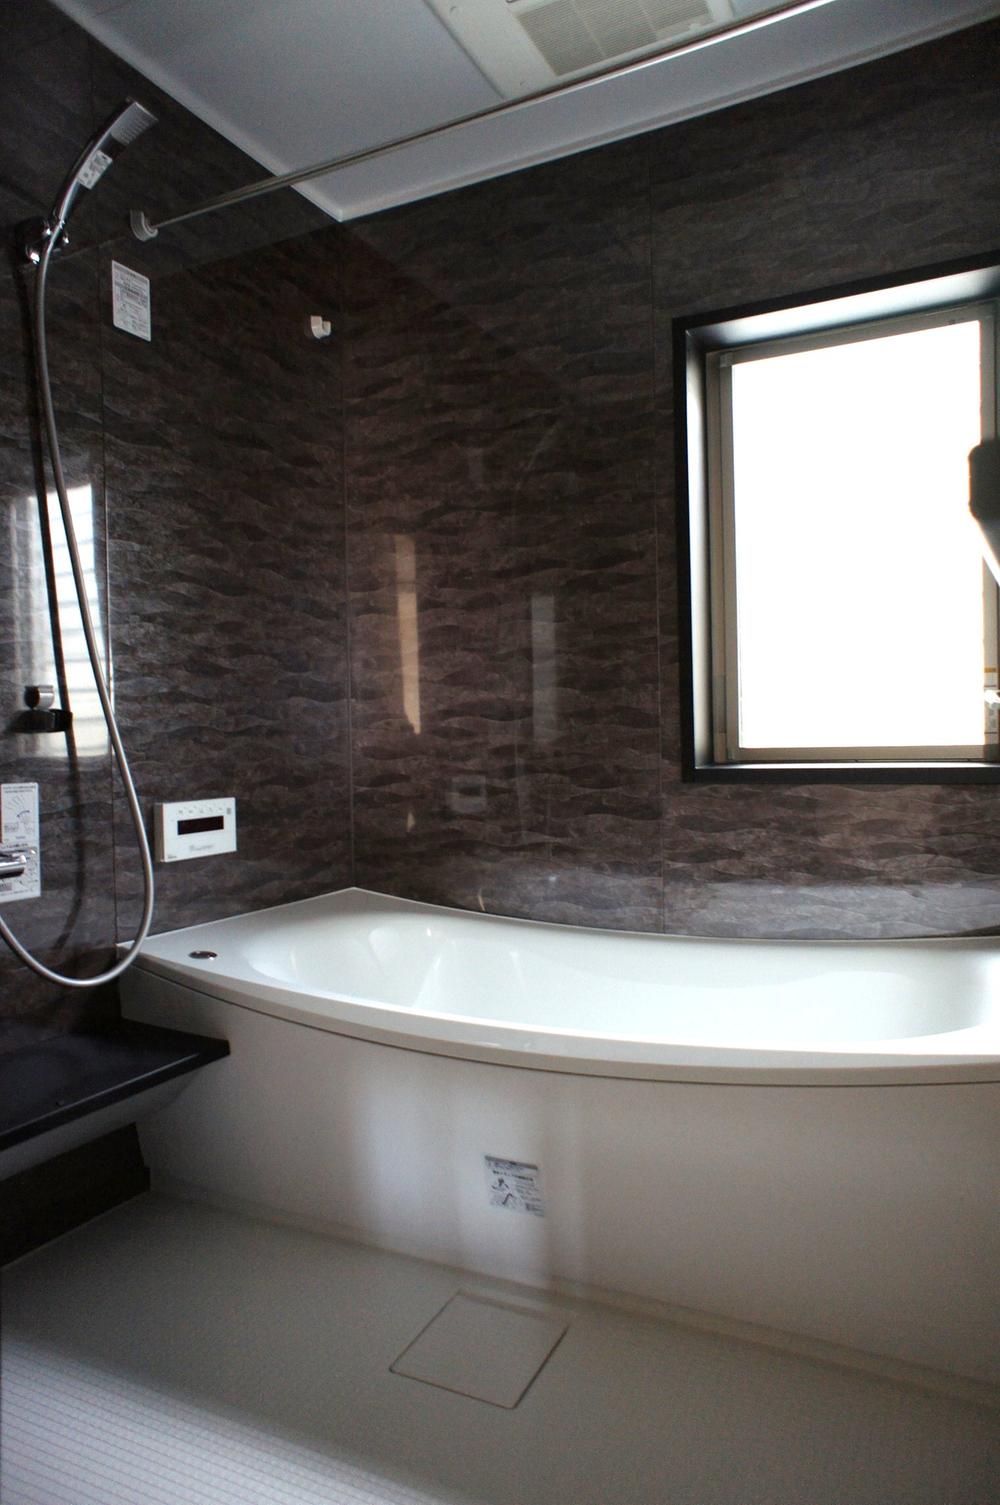 Same specifications photo (bathroom). You can leisurely bath in 1 pyeong size. 